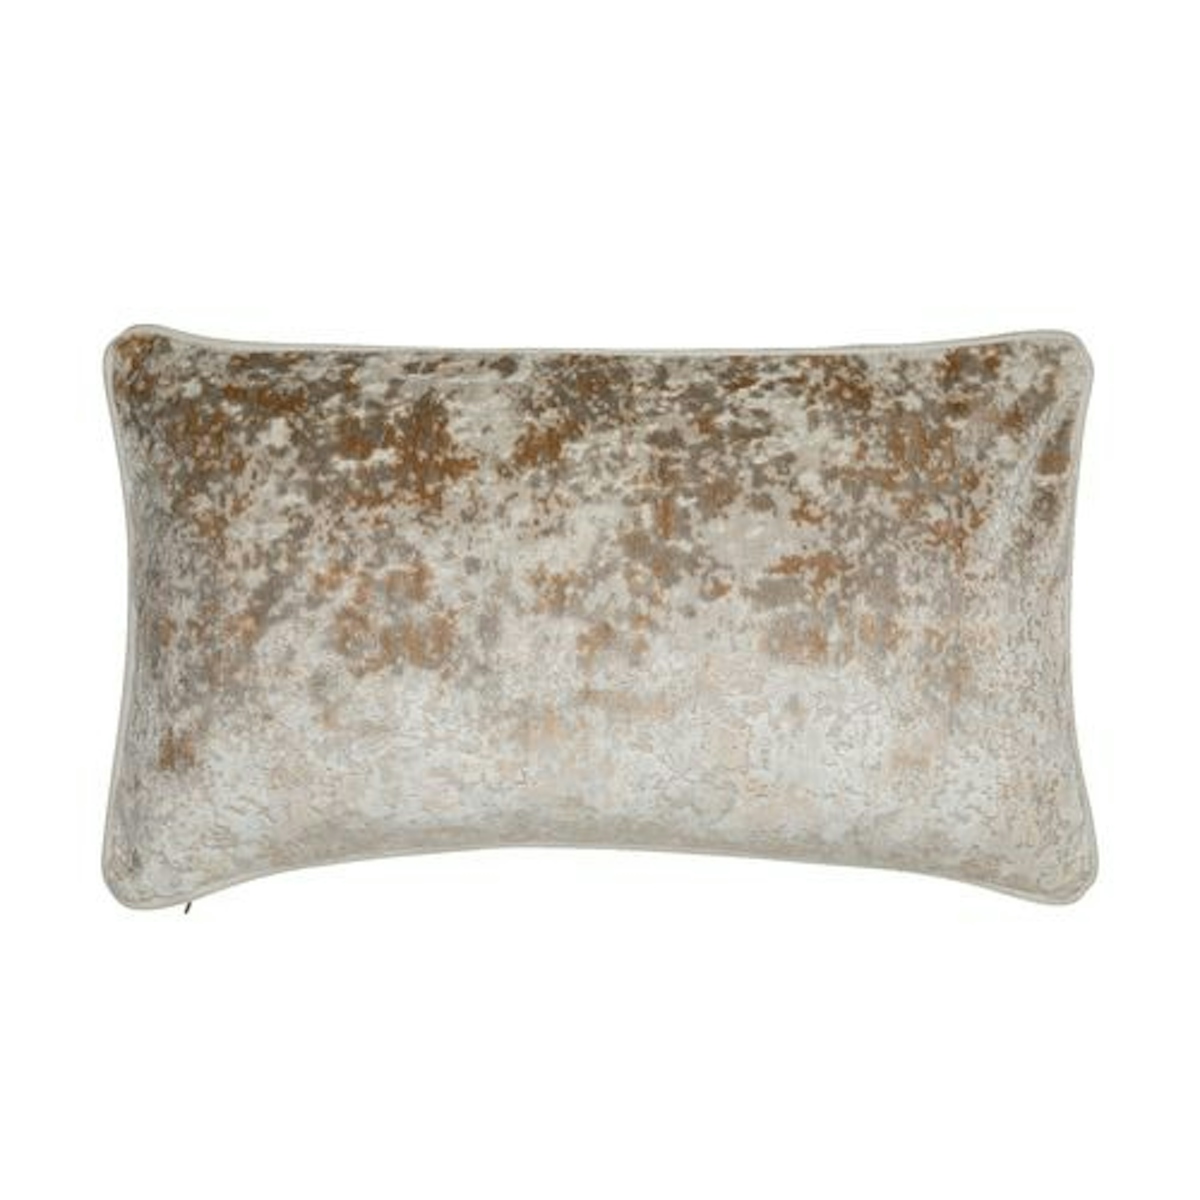 Silver Hunter Cushion - 9 Best Luxury Cushions to Buy for your Home - Style Guide - LuxDeco.com